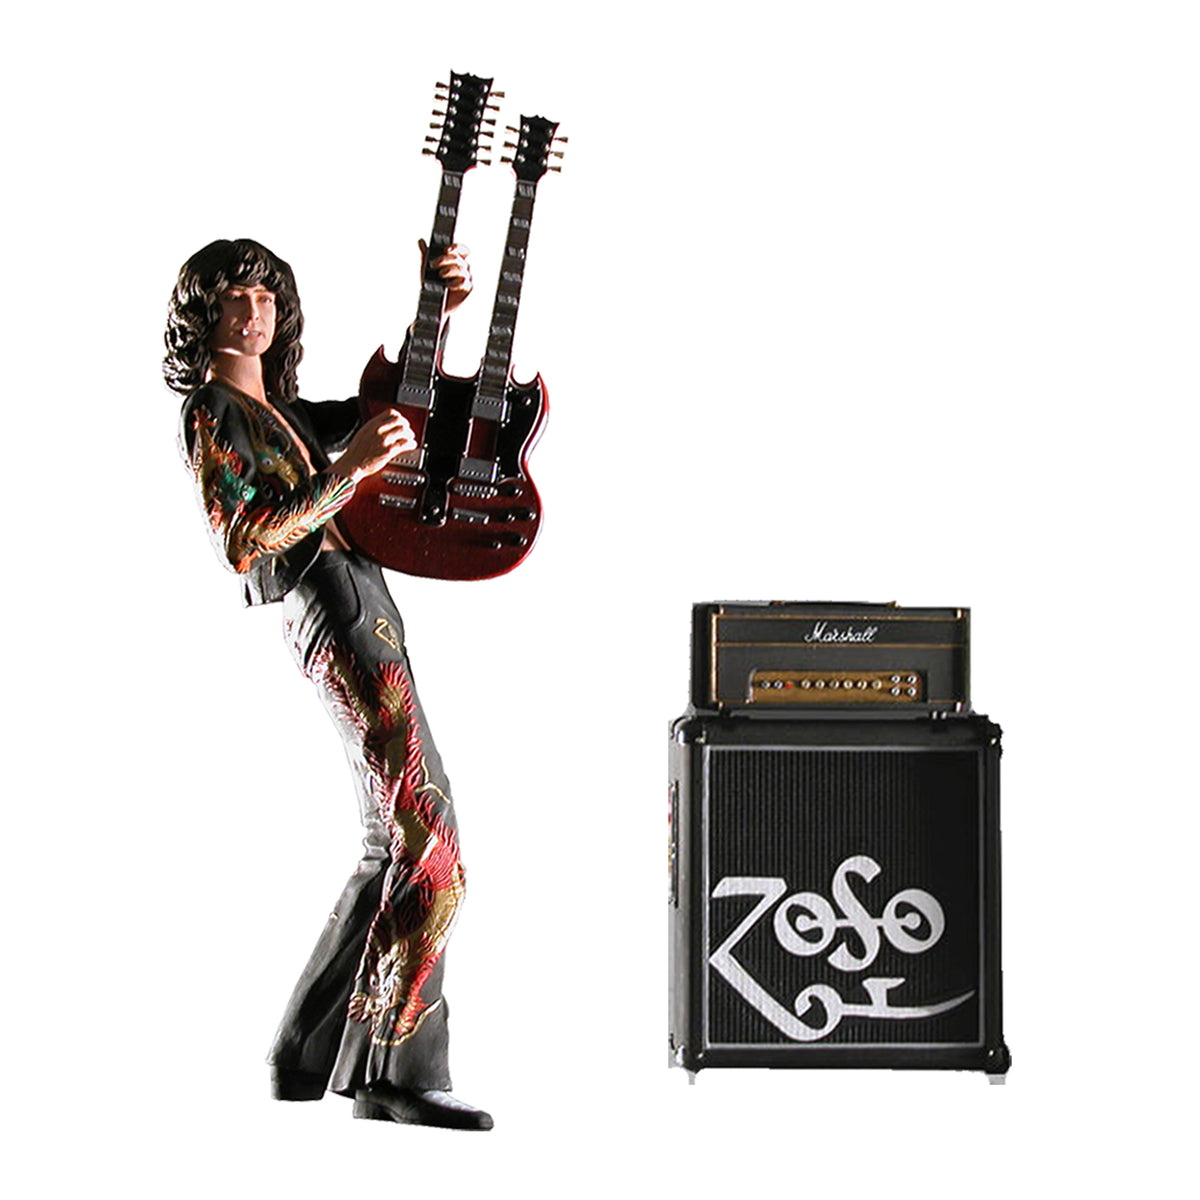 SOLD OUT! Led Zeppelin Collectible: NECA 2006 Jimmy Page Dragon 